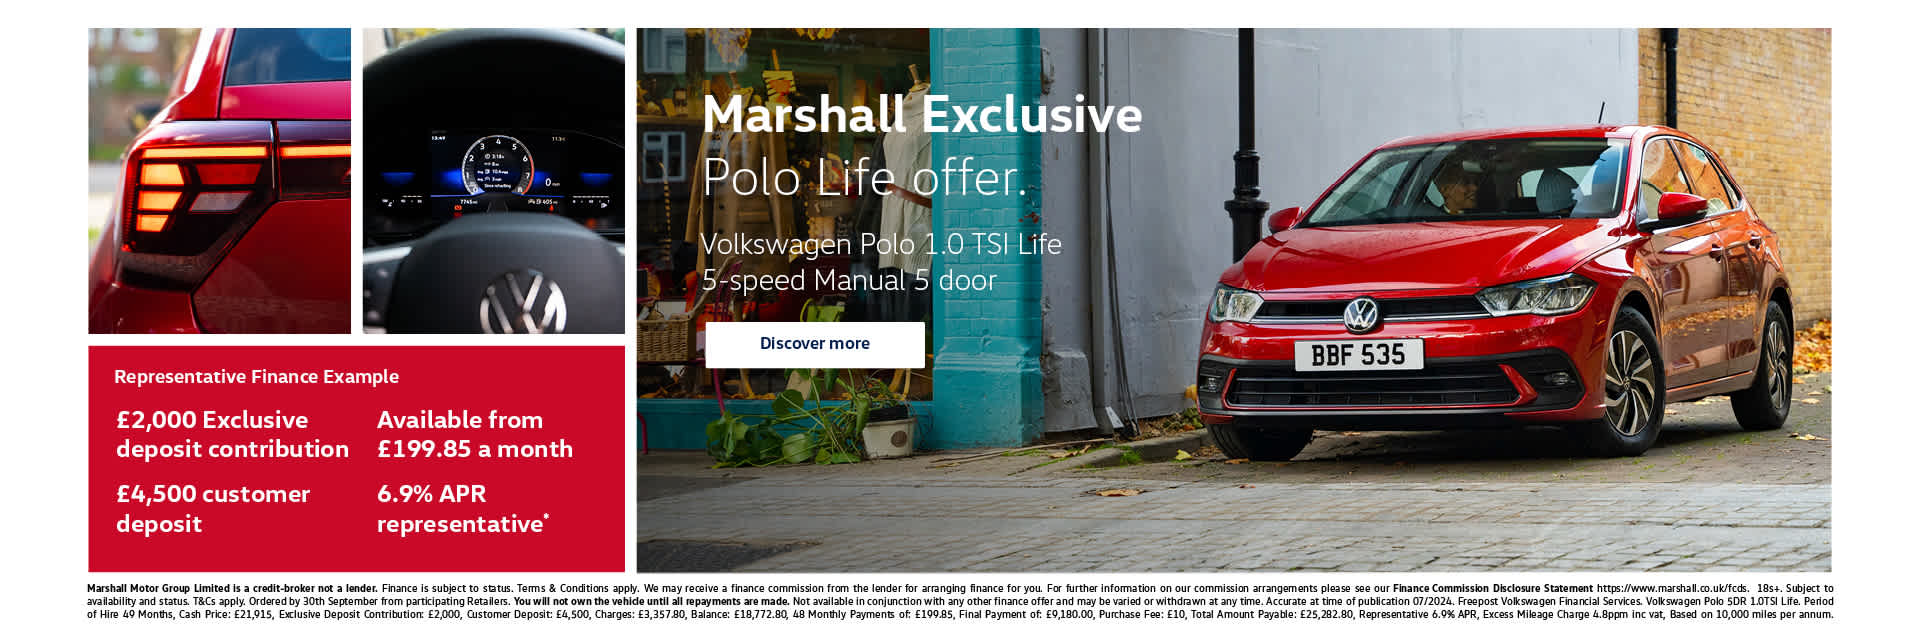 Volkswagen Polo Personal Contract Purchase Exclusive Offer